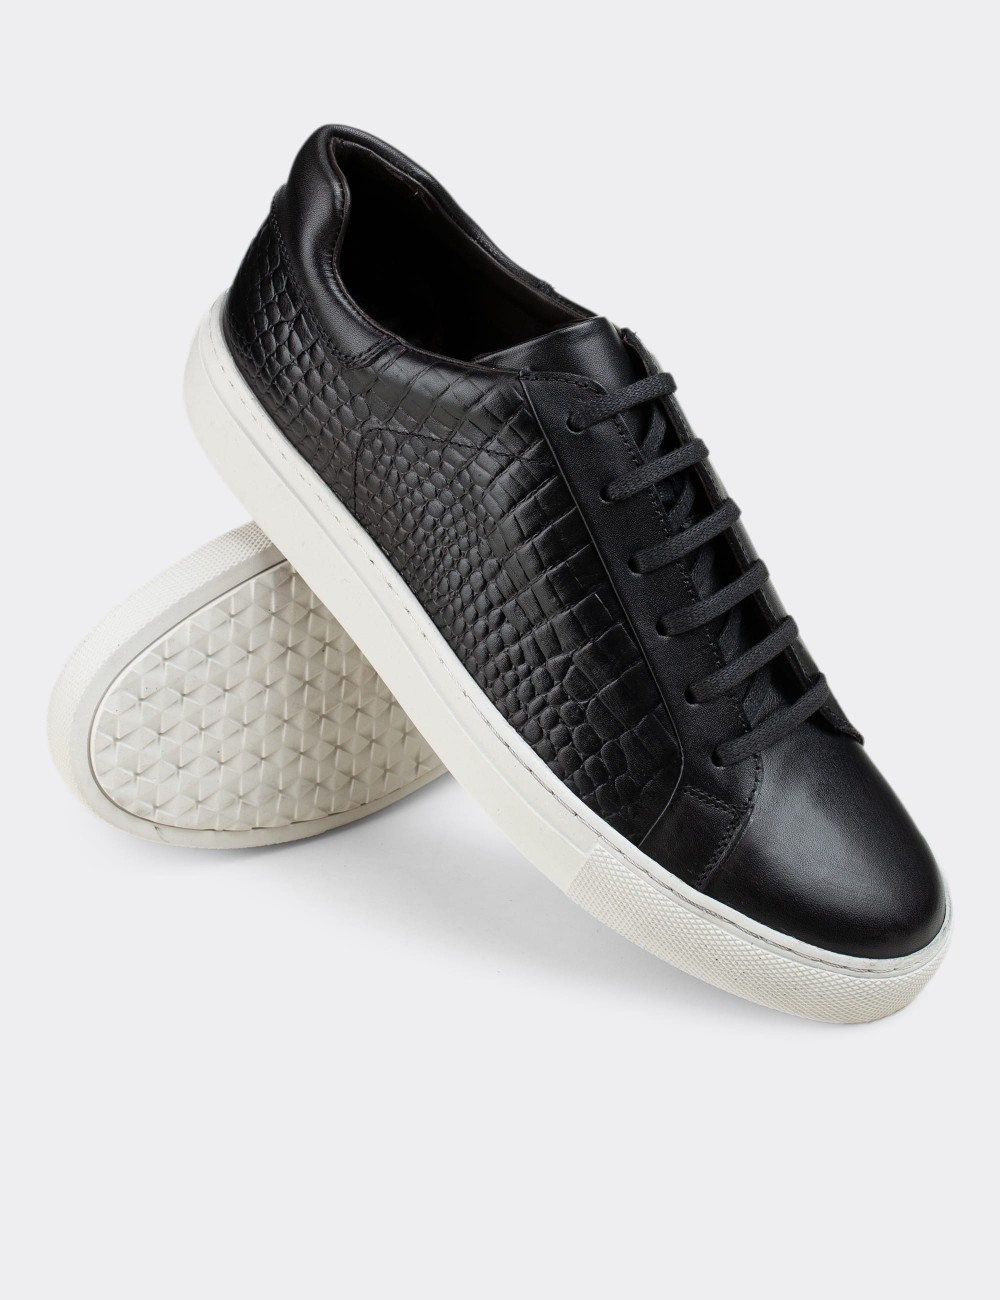 Black  Leather Sneakers - 01829MSYHC02